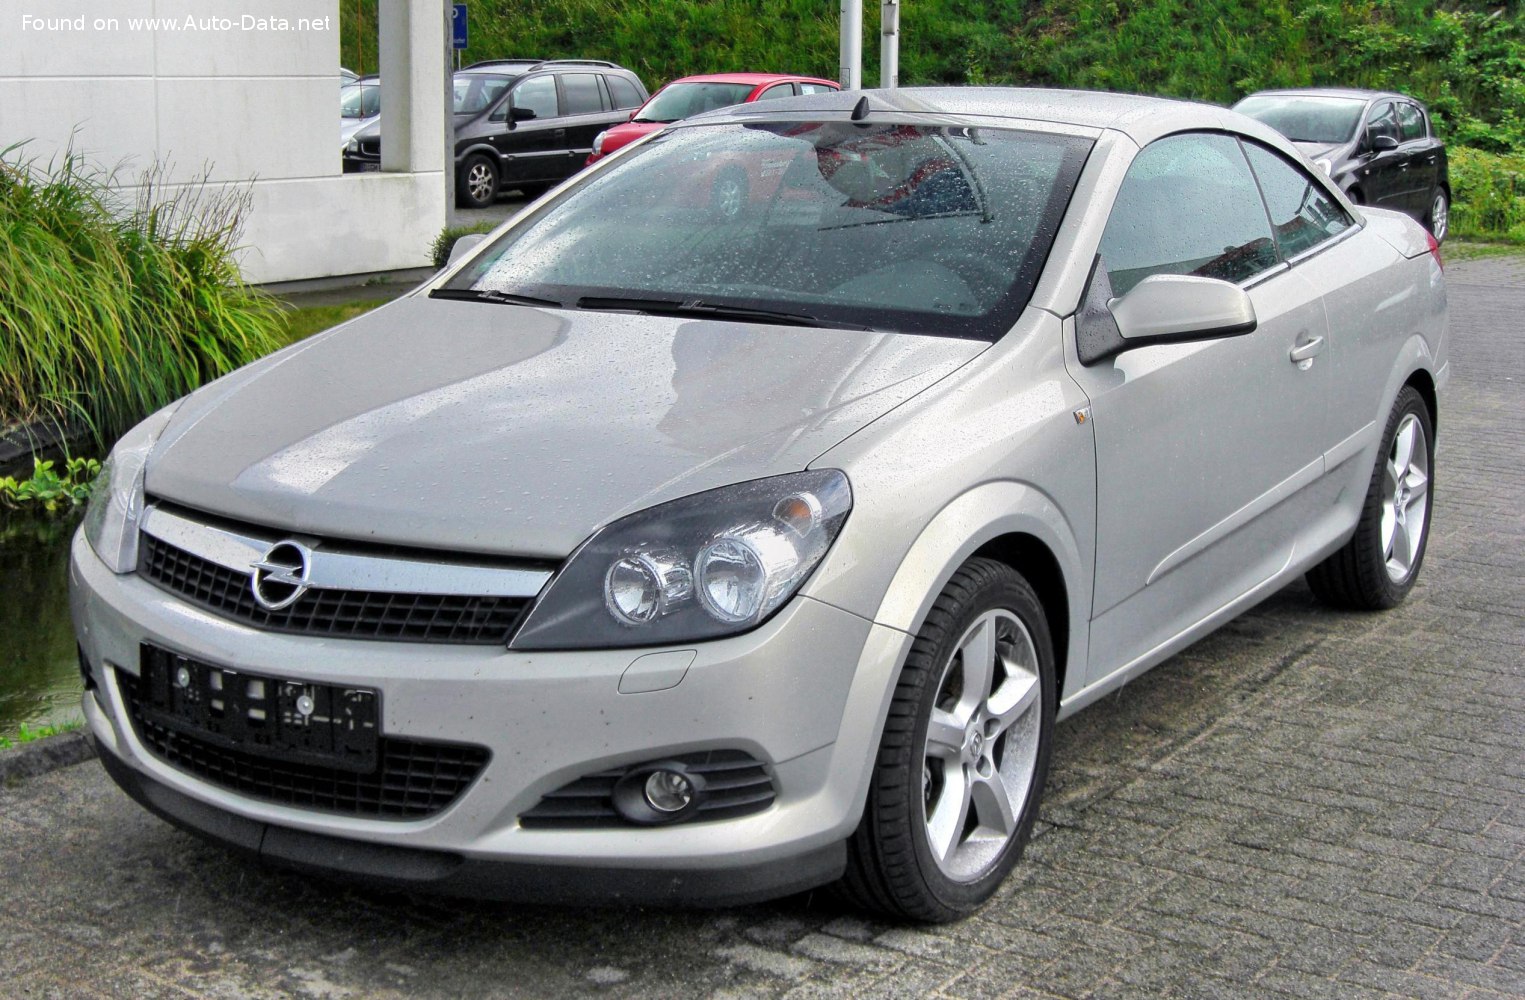 06 Opel Astra H Twintop 1 9 Cdti 150 Hp Technical Specs Data Fuel Consumption Dimensions